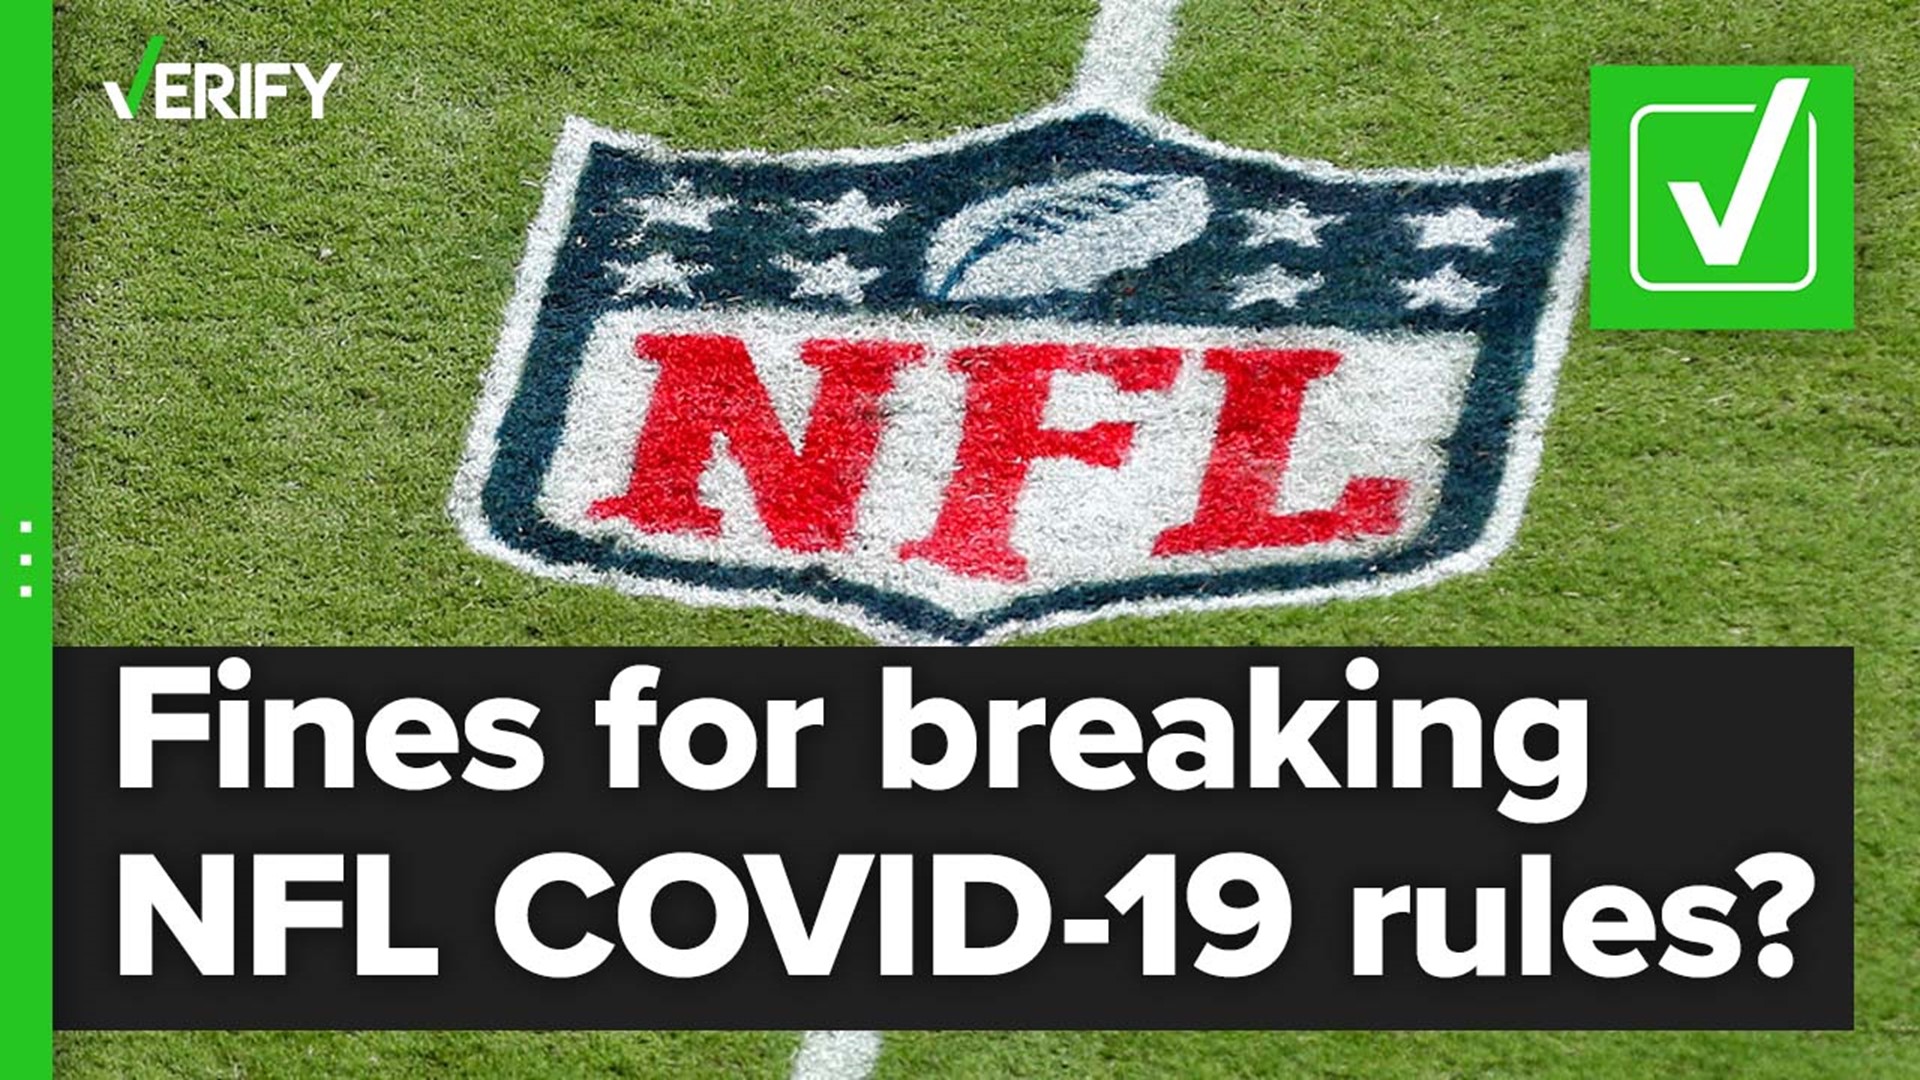 The NFL is investigating whether Green Bay Packers quarterback Aaron Rodgers followed COVID-19 protocols. The league has fined players and teams for past violations.